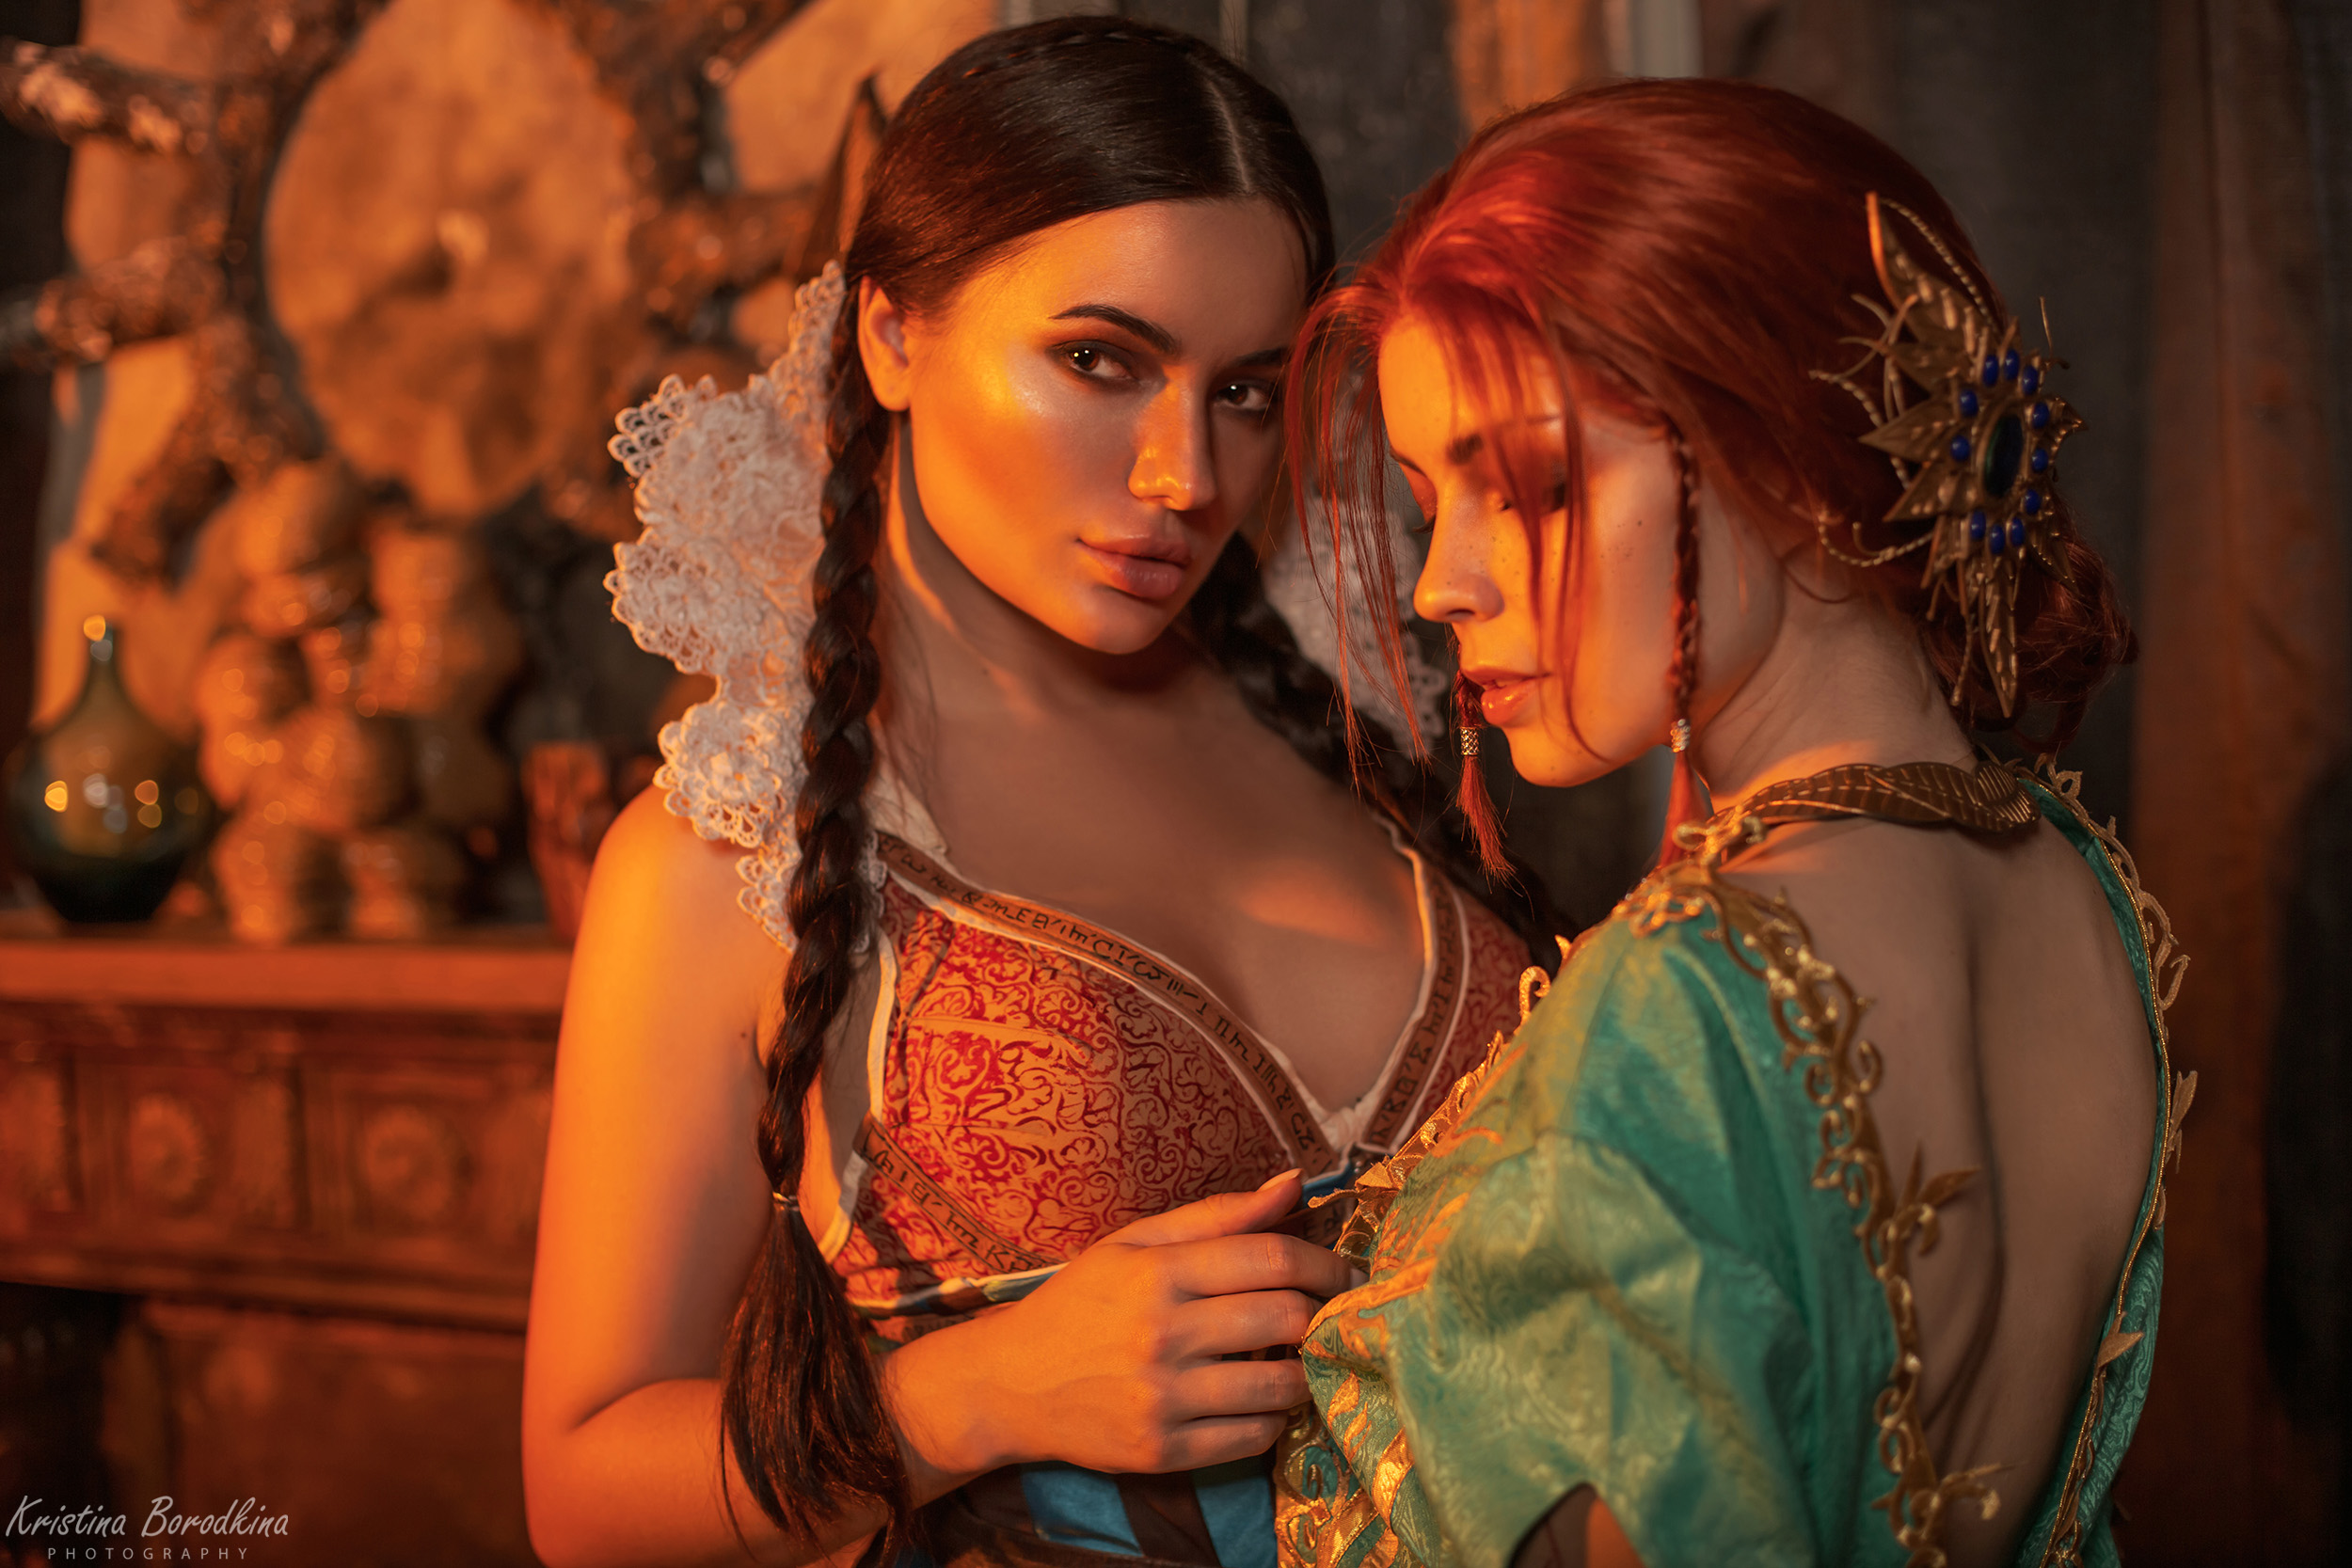 People 2500x1667 Triss Merigold The Witcher The Witcher 3: Wild Hunt video games video game characters women redhead brunette braids two women dress cleavage looking at viewer brown eyes depth of field portrait indoors women indoors cosplay Kristina Borodkina model Filippa Eilhart Philippa Eilhart Russian women Russian Russian model